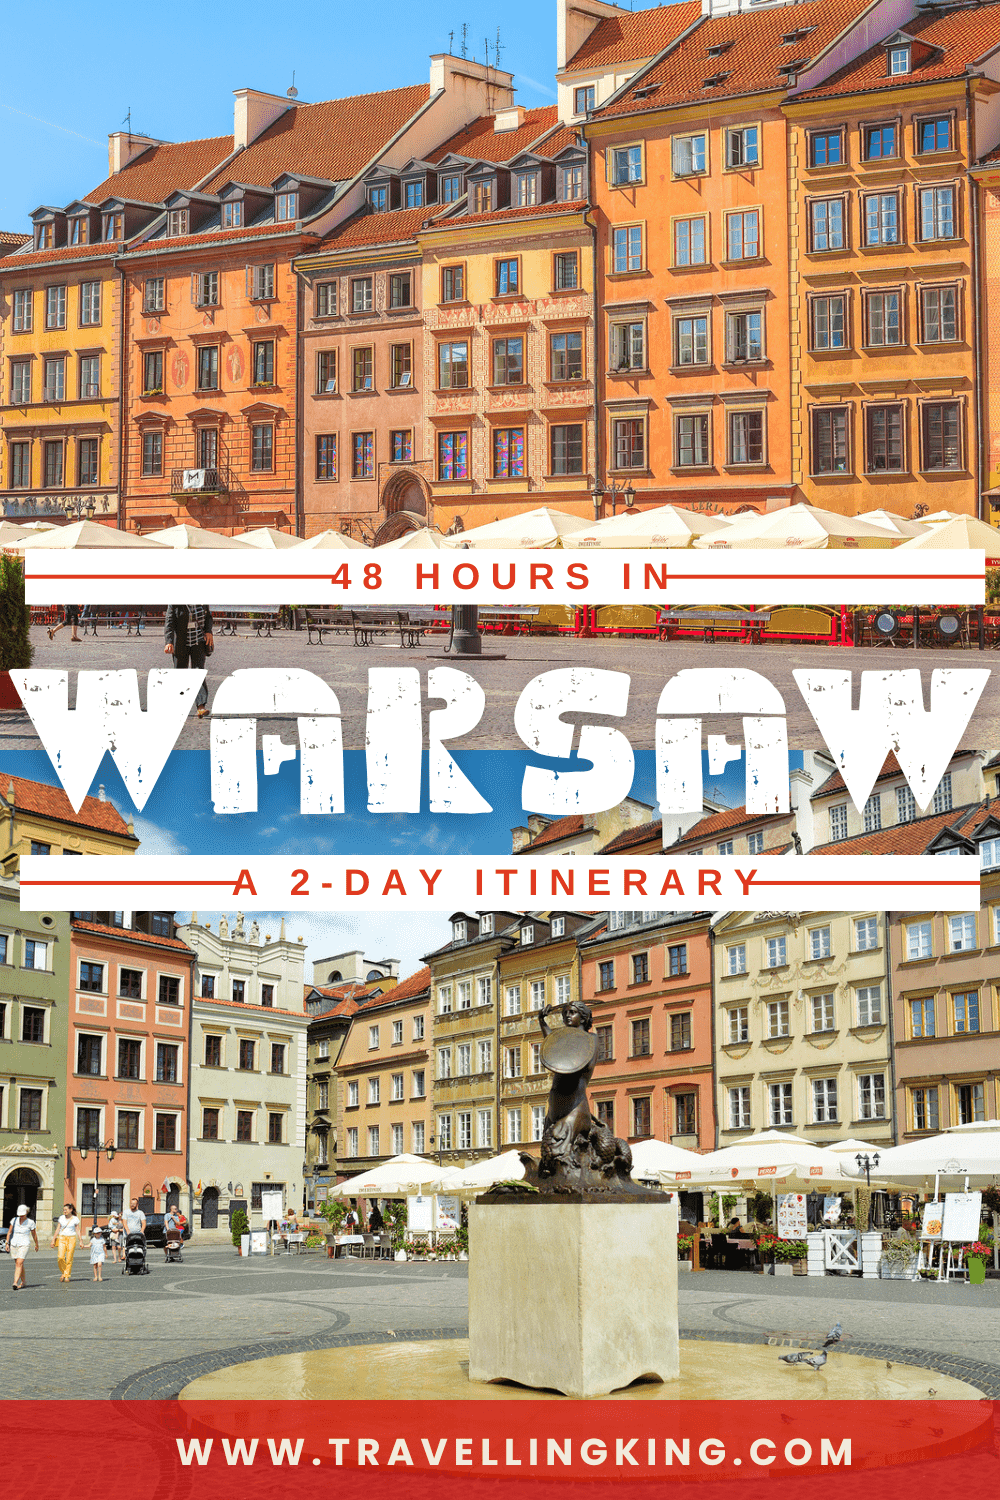 48 hours in Warsaw - A 2 day Itinerary